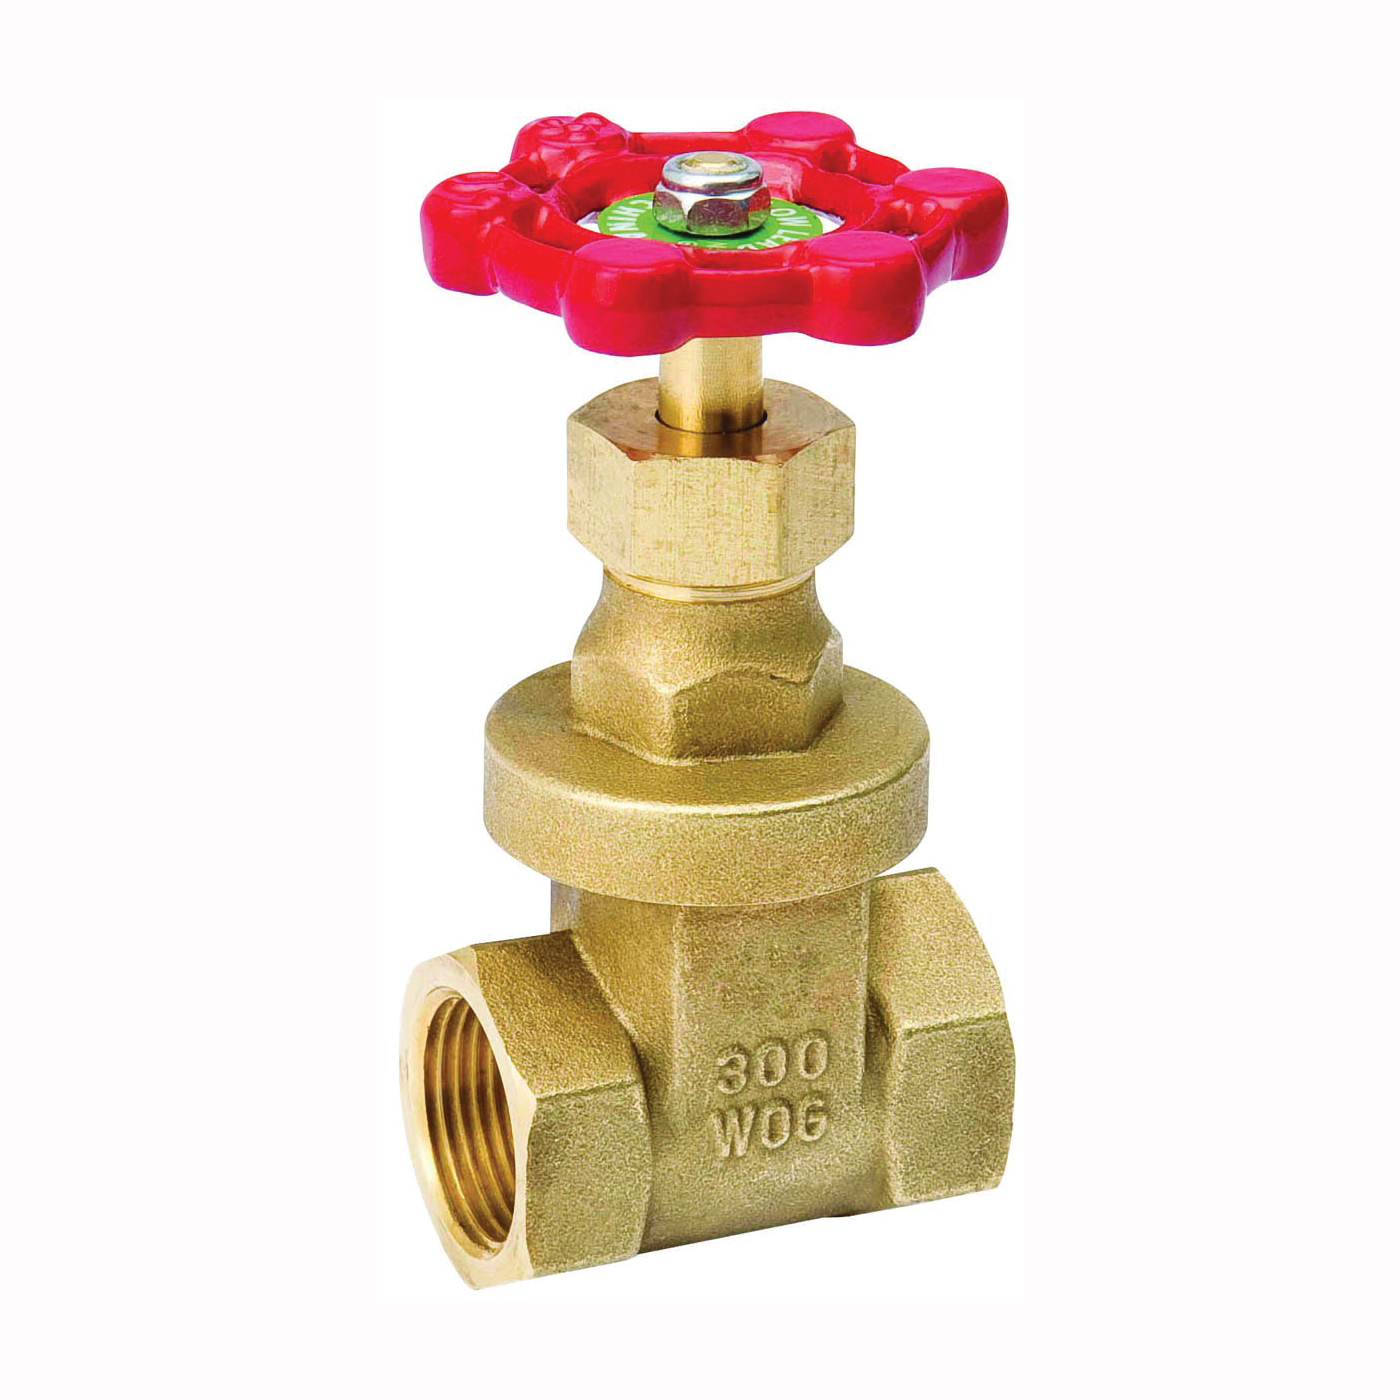 ProLine Series 100-205NL Gate Valve, 1 in Connection, FPT, 300/150 psi Pressure, Brass Body